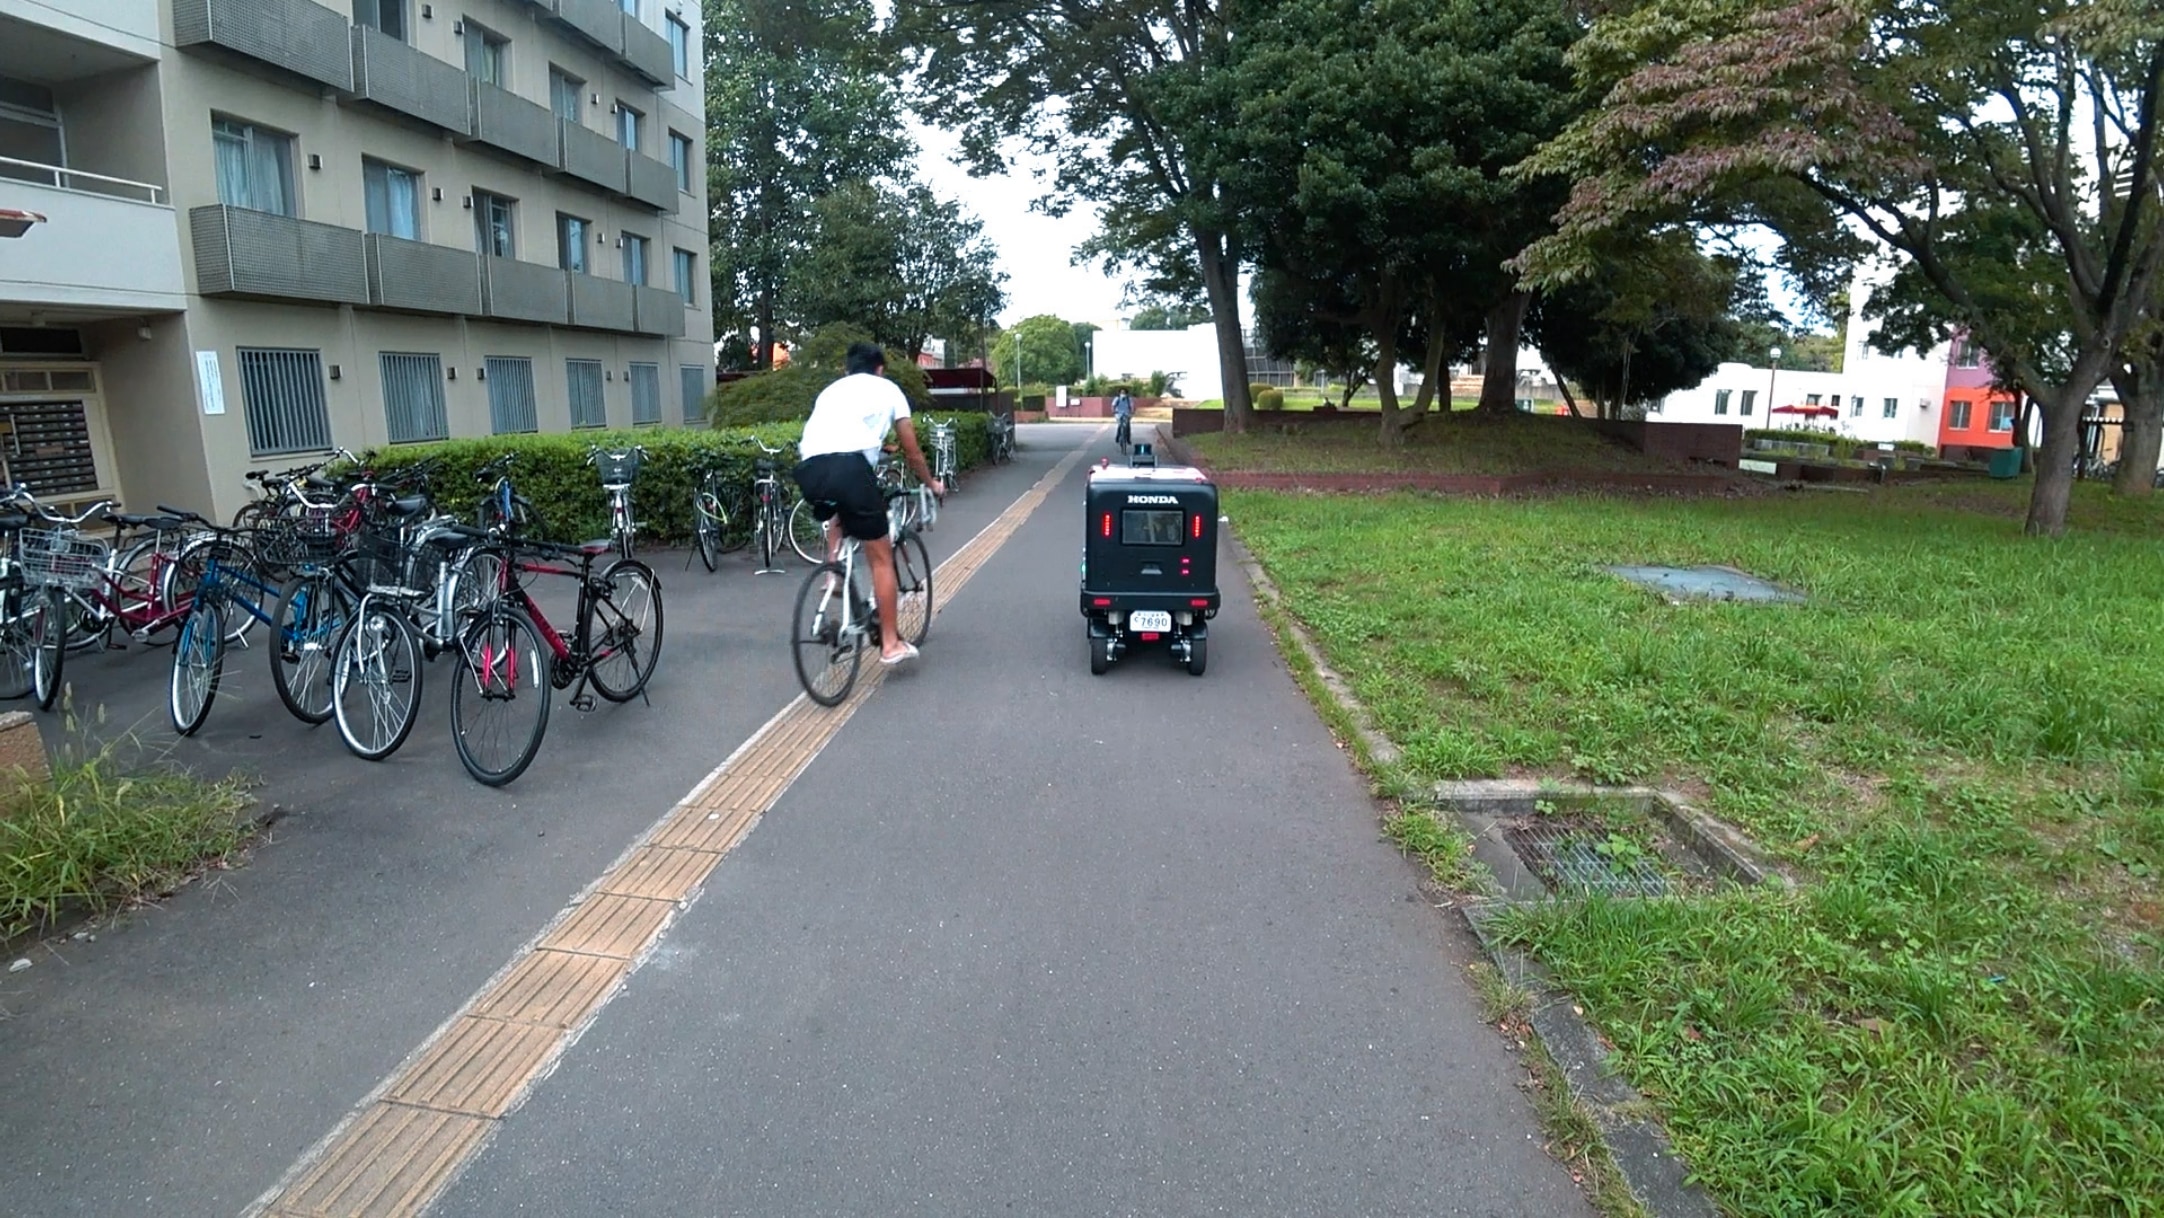 The trial was done on a sidewalk. In the sidewalk's narrowest section, the cyclist and the robot pass closely.